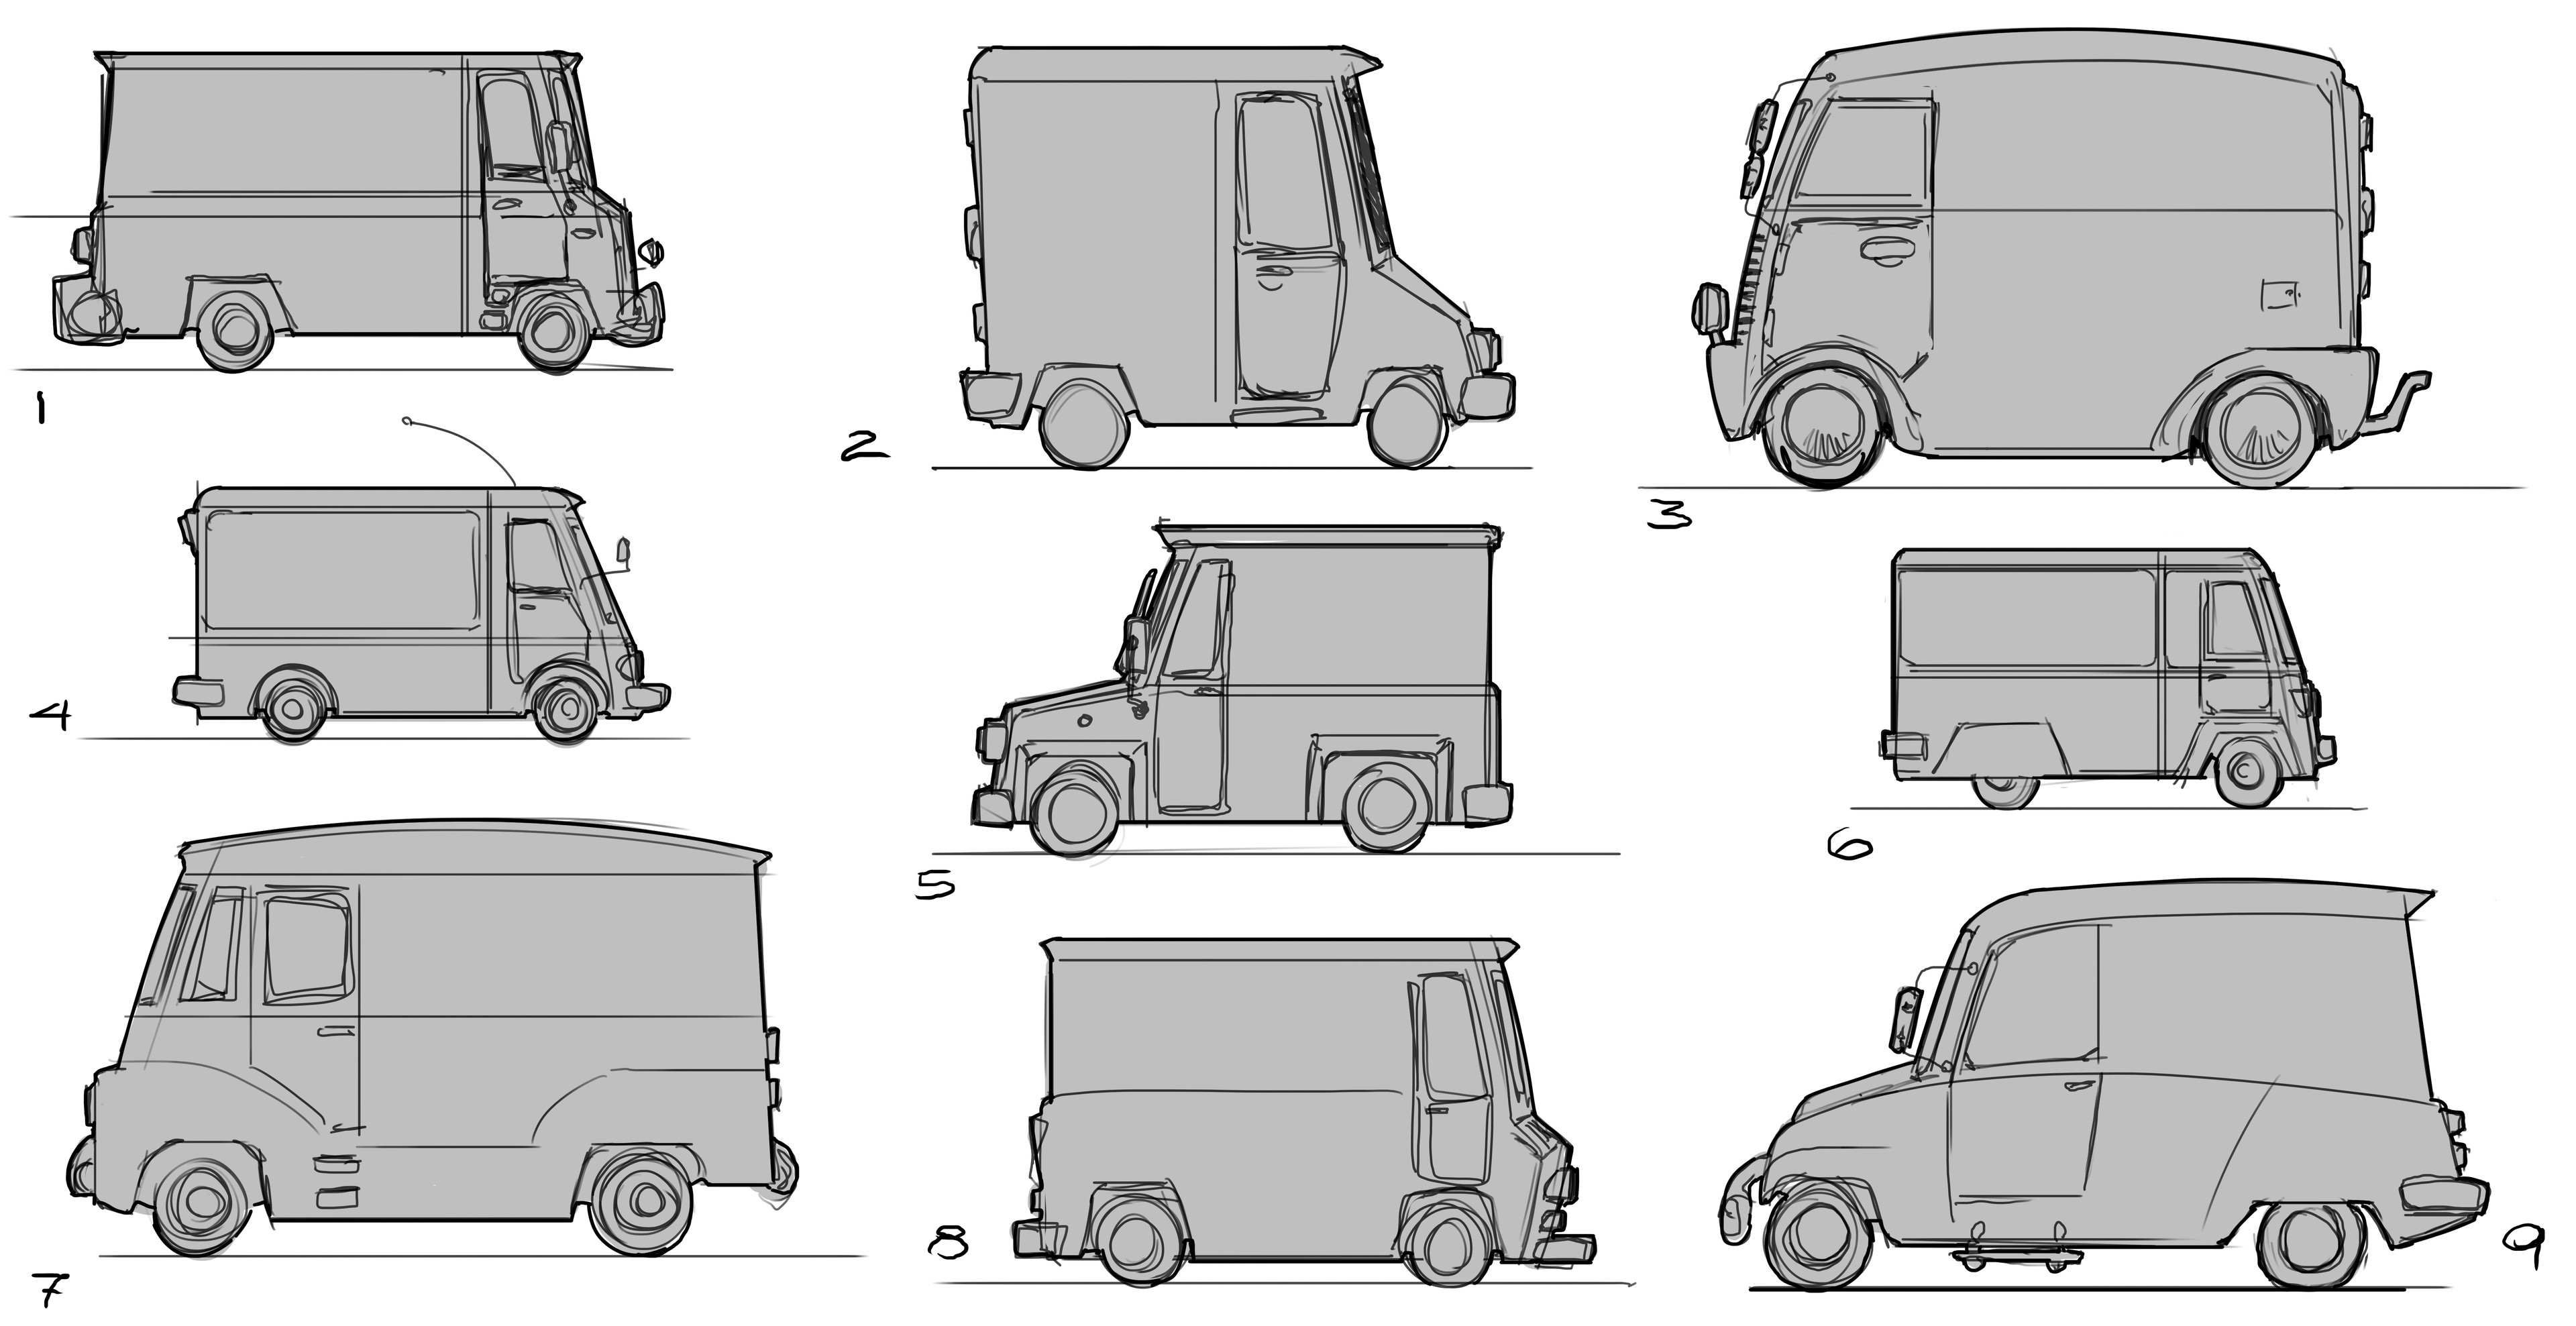 Concepts of the truck